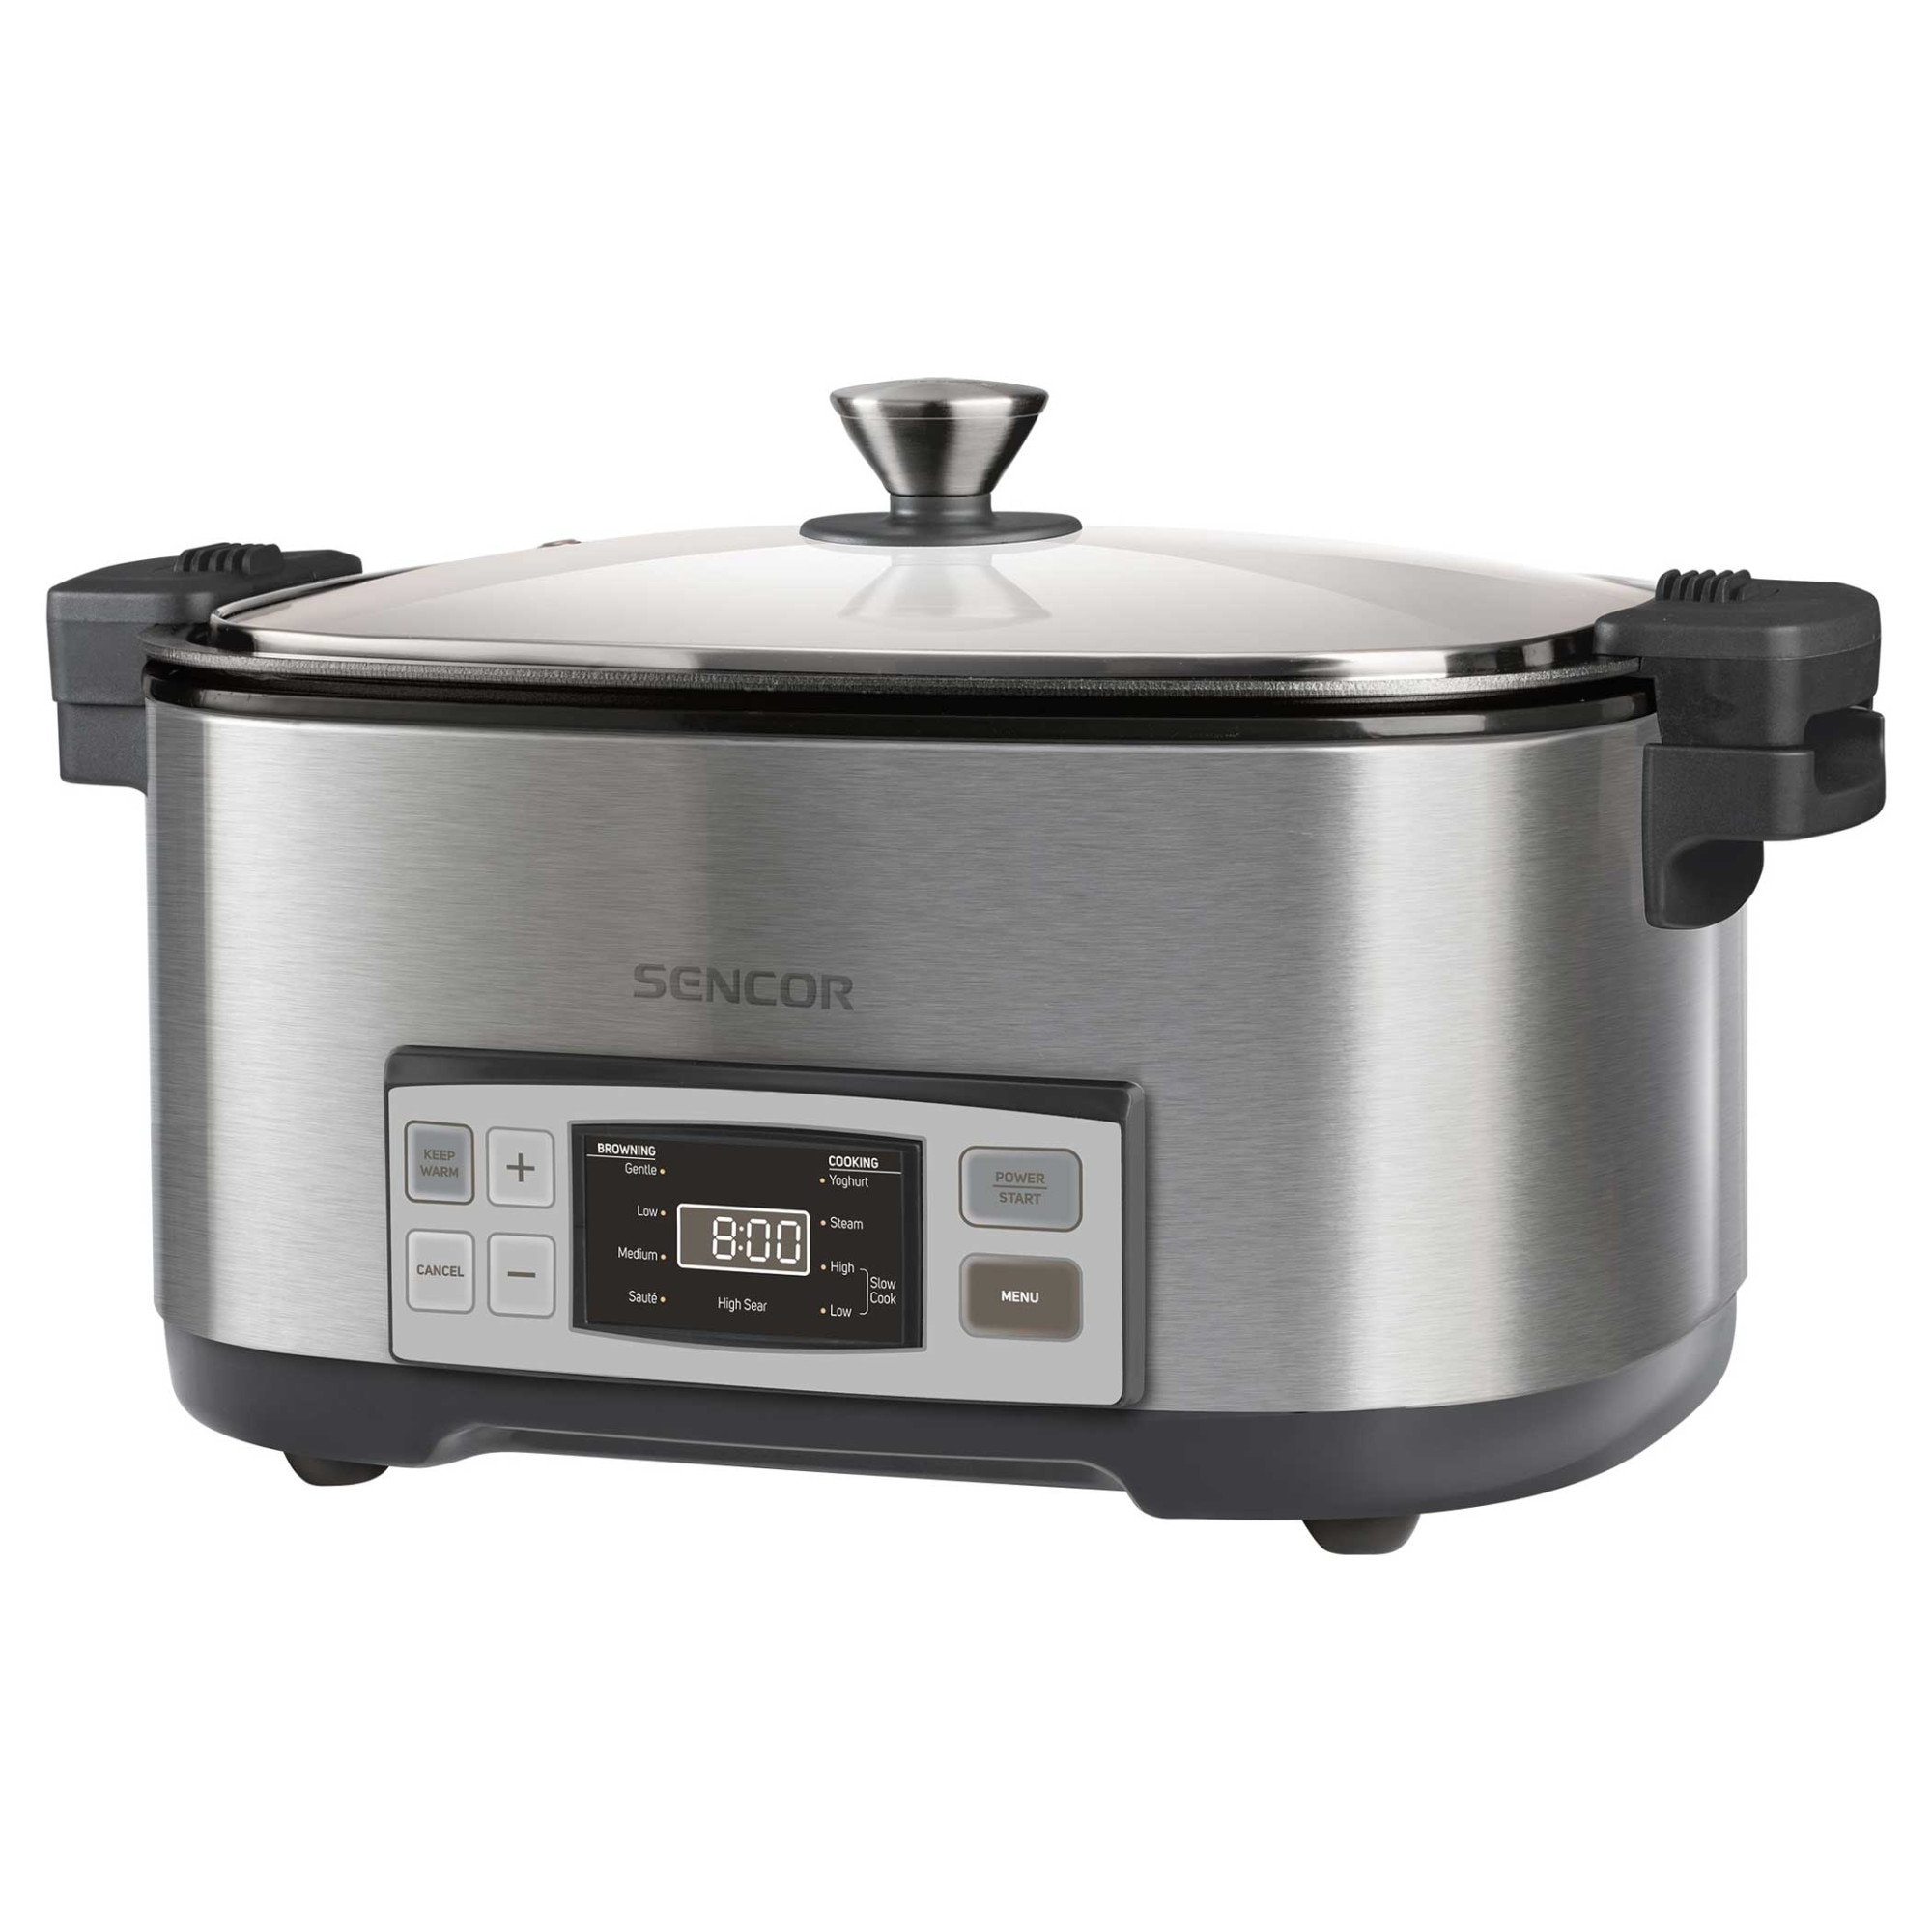 Breville the Searing Slow Cooker LSC650BSS - Consumer NZ